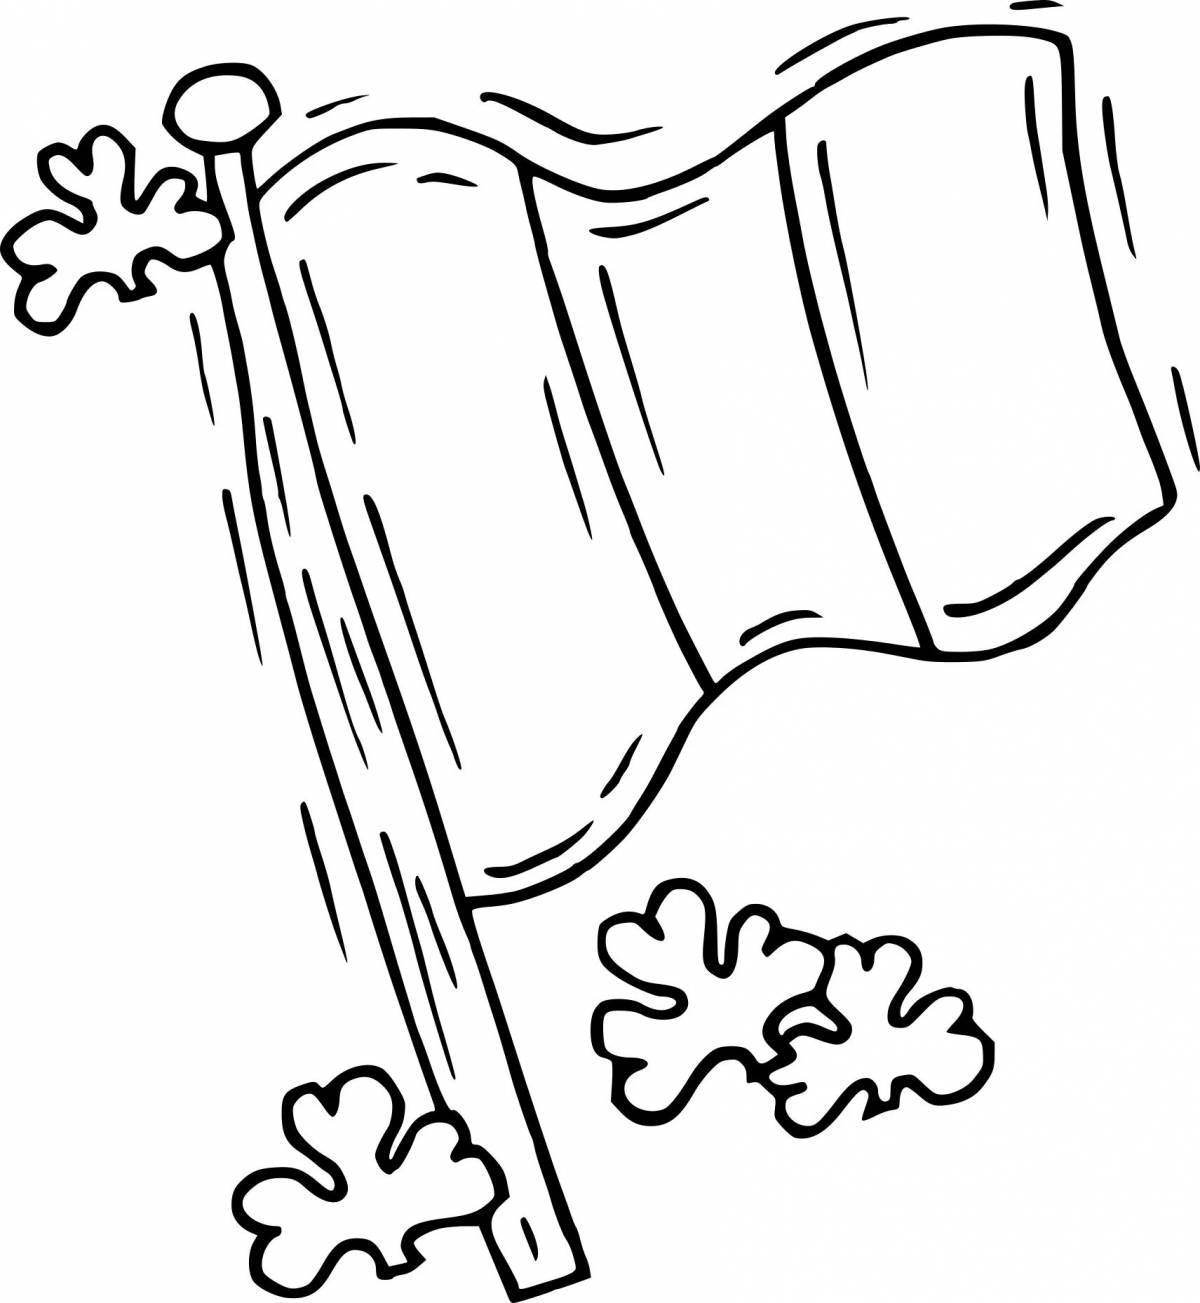 Lovely Russian flag coloring page for kids